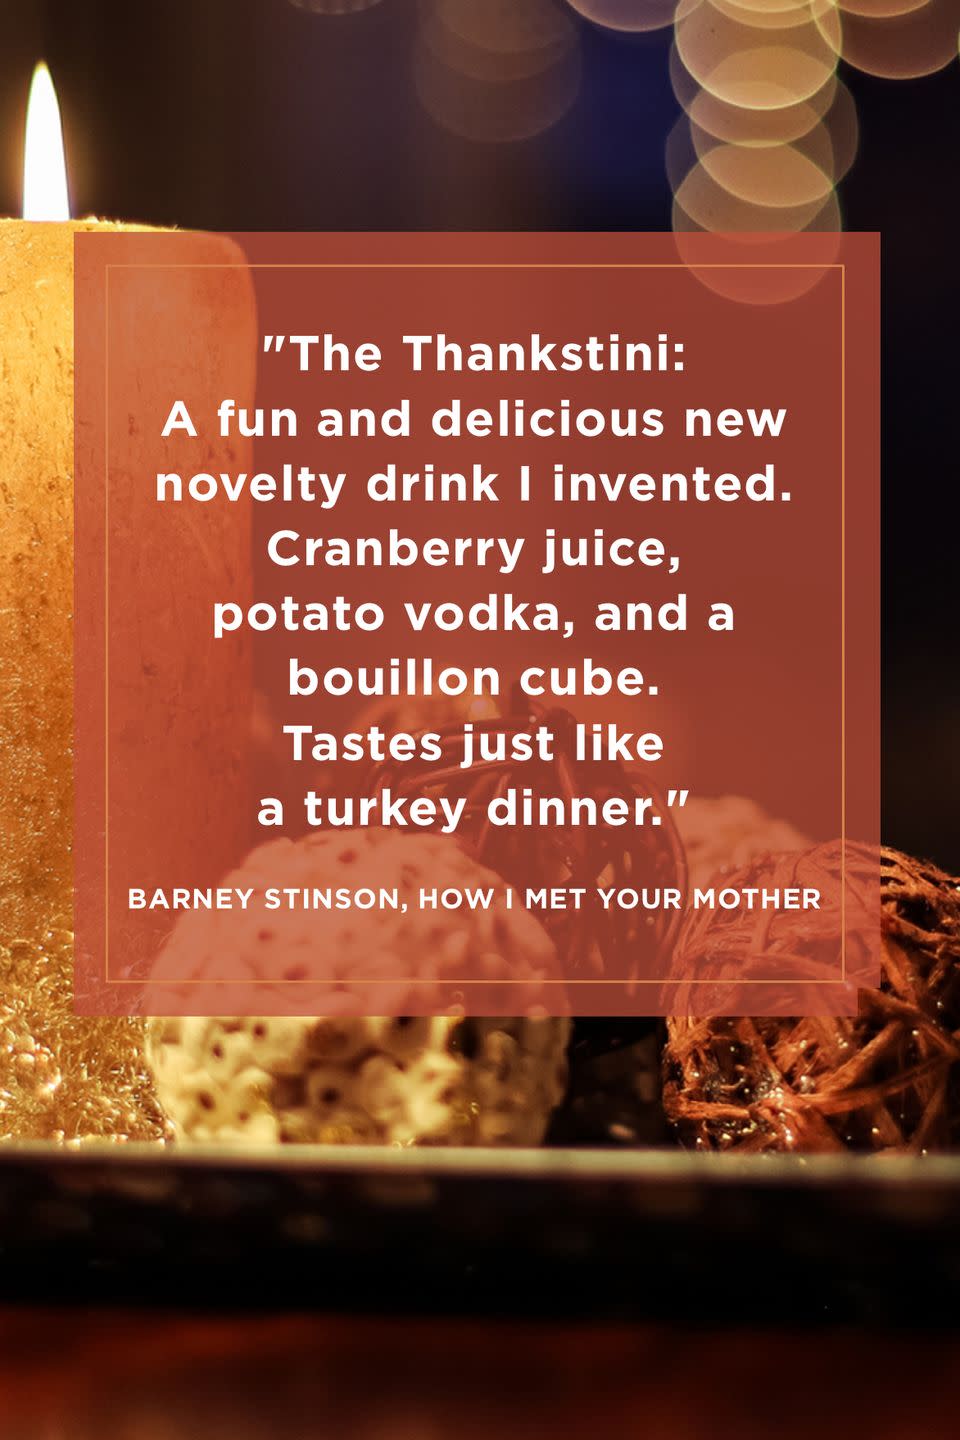 <p>"The Thankstini: A fun and delicious new novelty drink I invented. Cranberry juice, potato vodka, and a bouillon cube. Tastes just like a turkey dinner."</p>